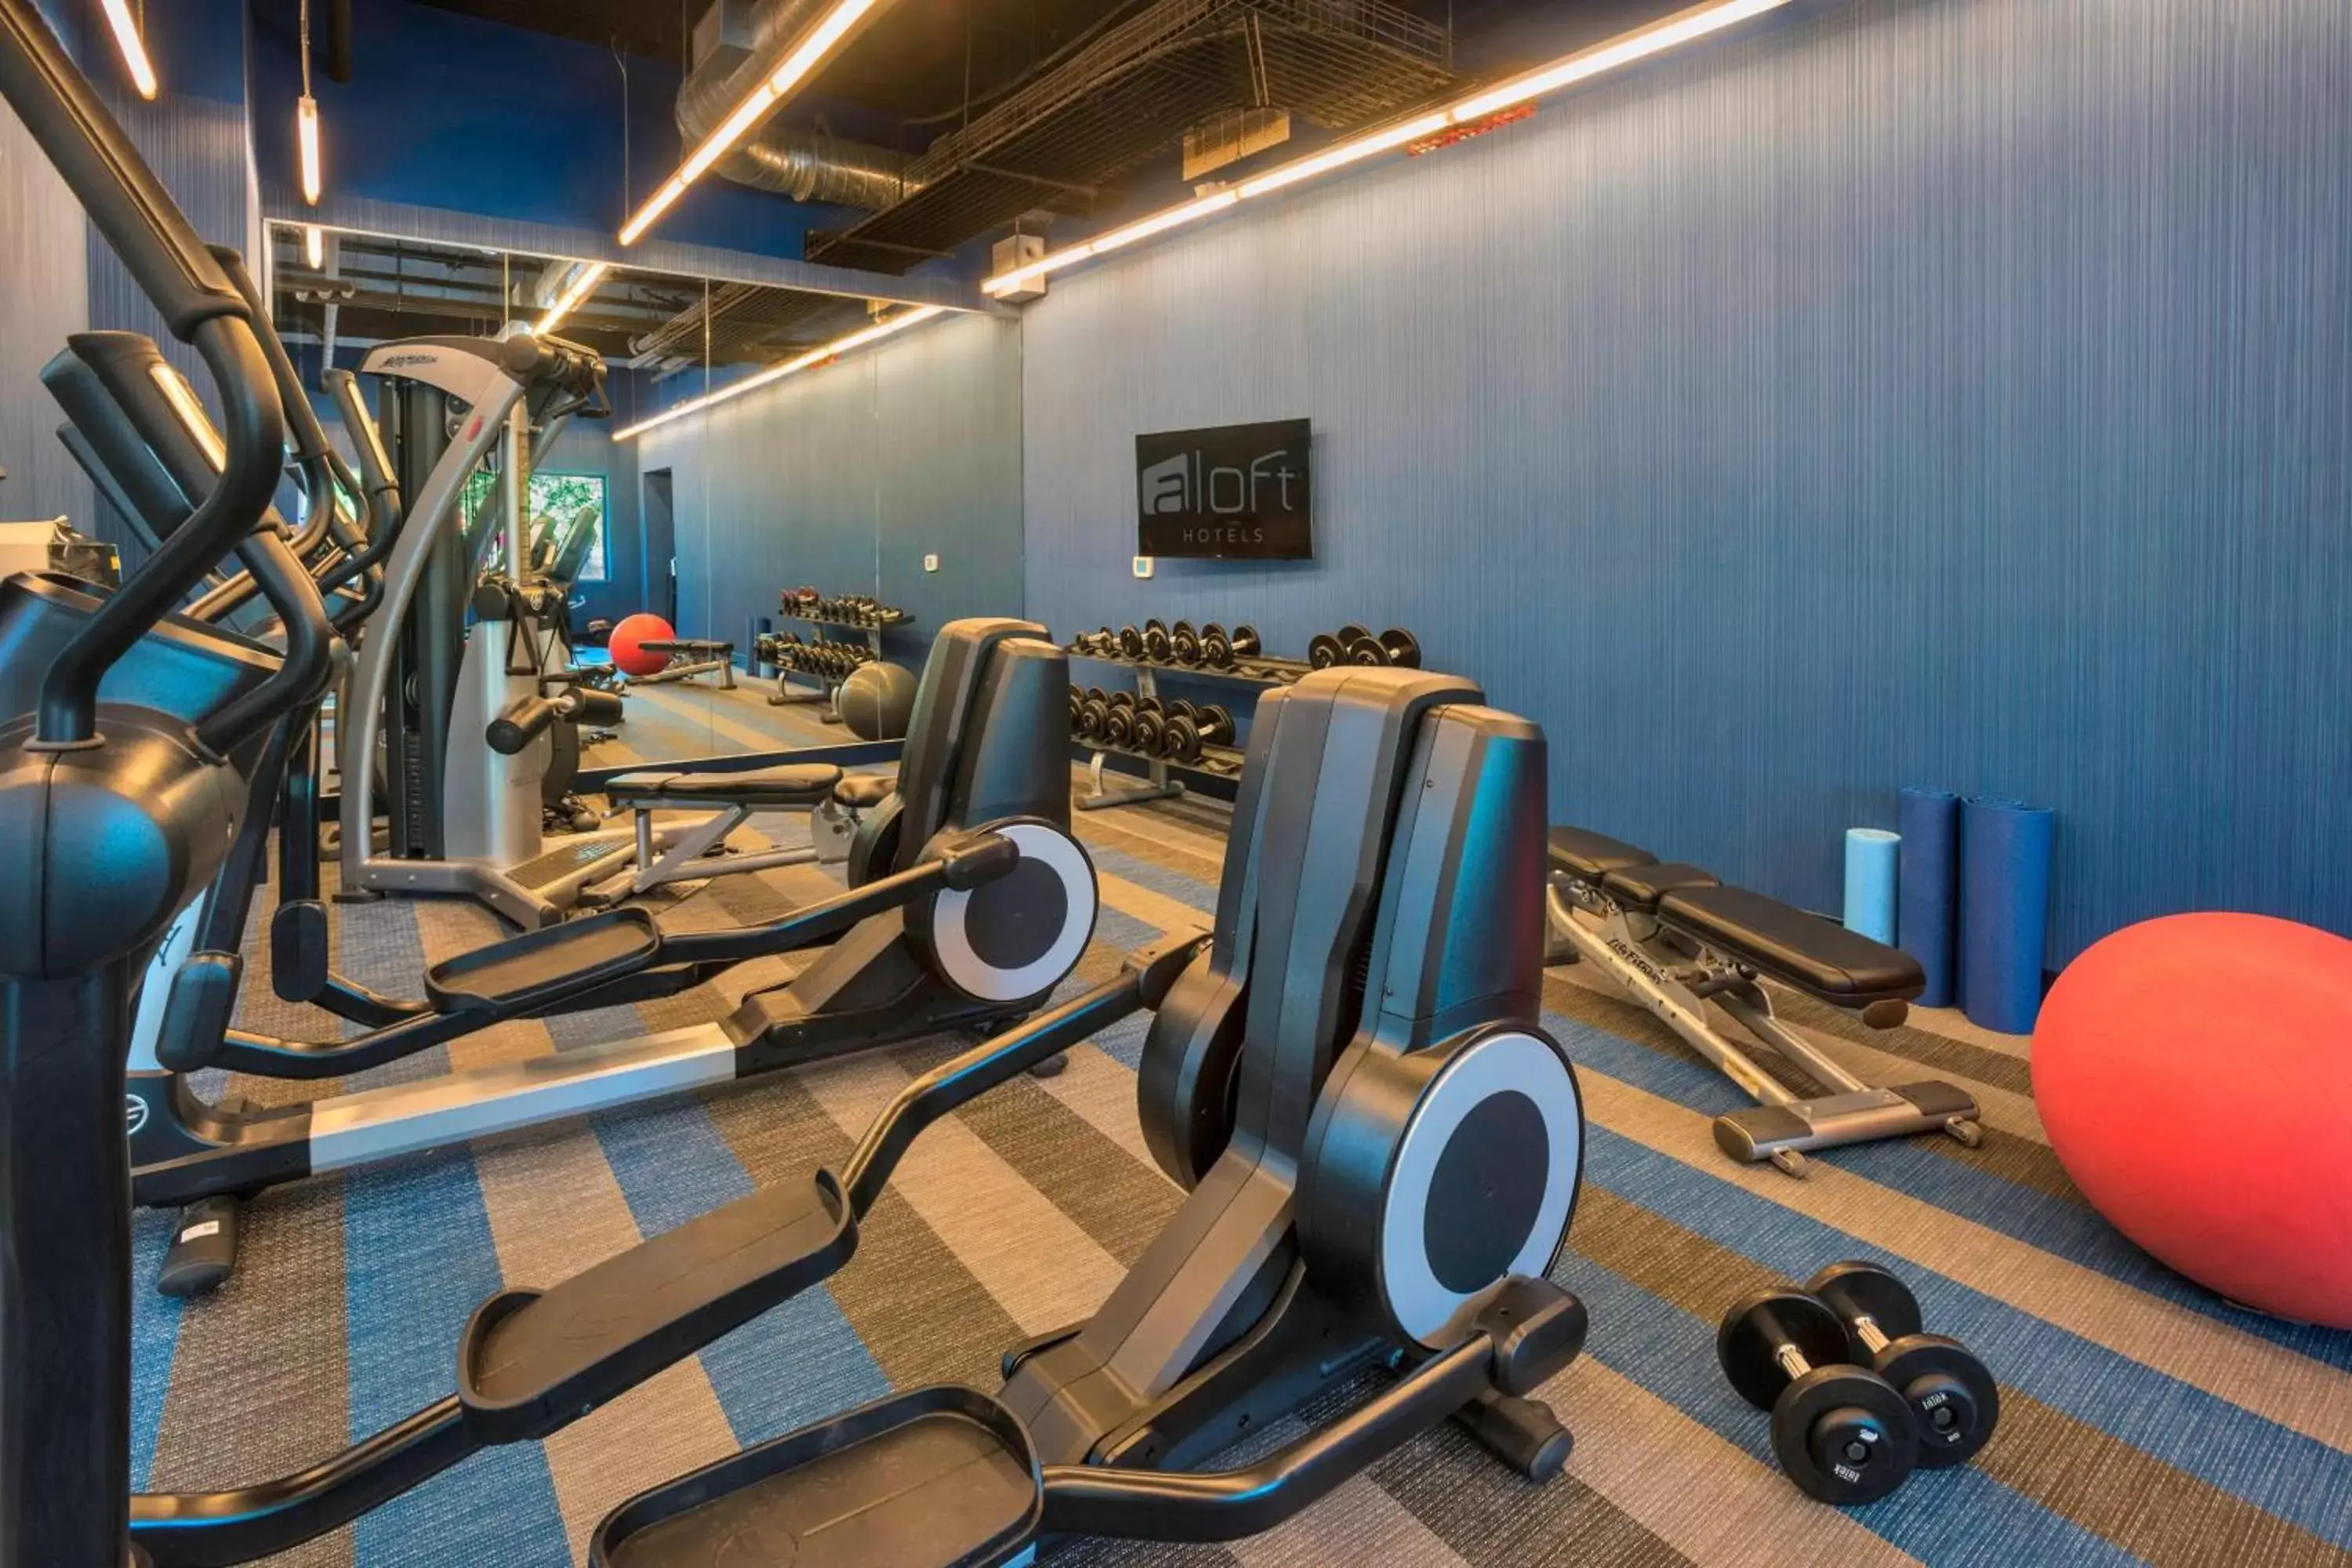 Fitness centre/facilities, Fitness Center/Facilities in Aloft Portland Airport Hotel at Cascade Station